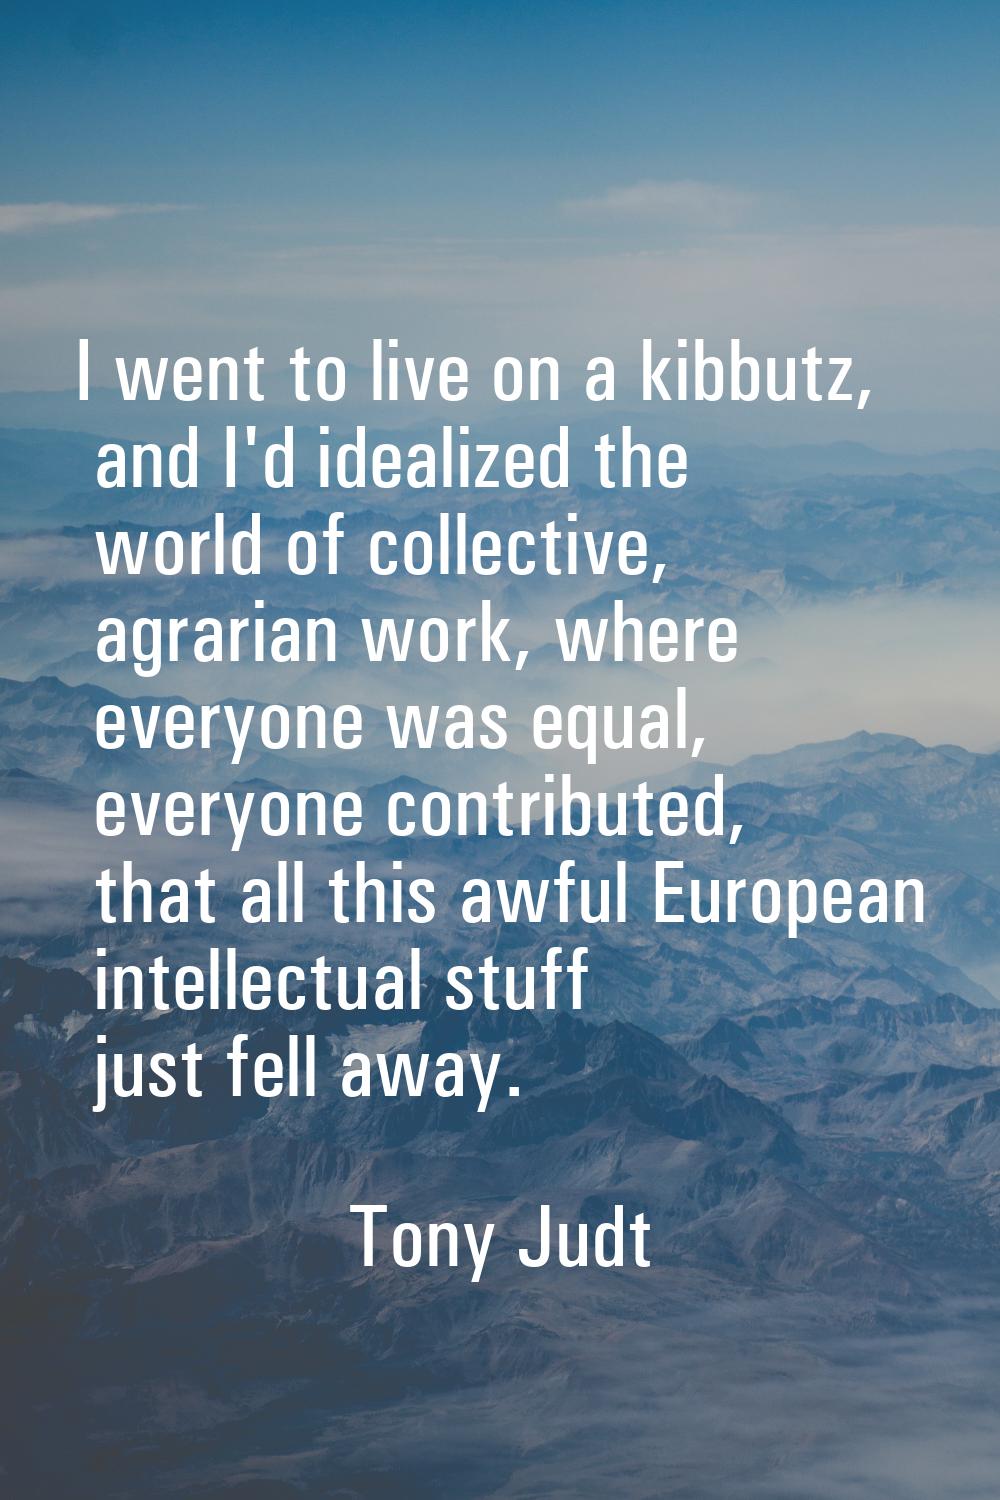 I went to live on a kibbutz, and I'd idealized the world of collective, agrarian work, where everyo